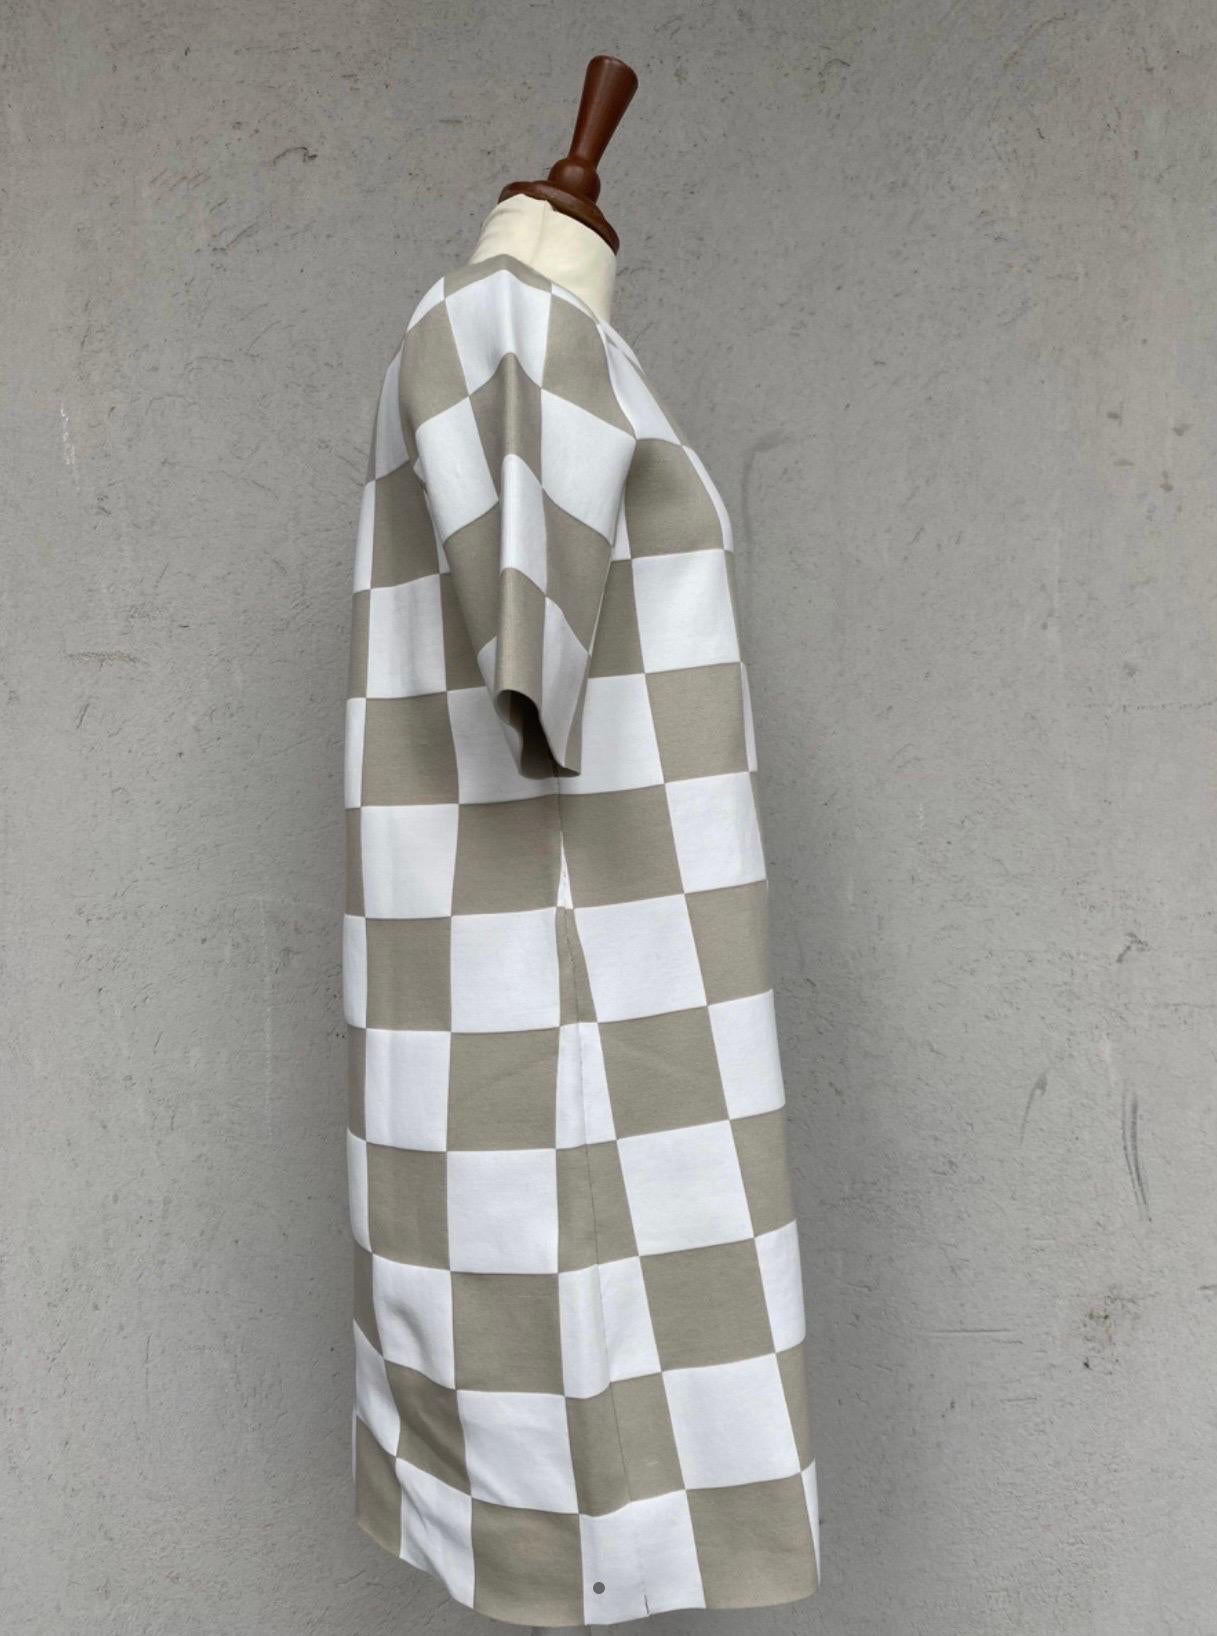 Louis Vuitton midi dress.
SS2013 collection, in mixed material, see label, white and beige checked. size L, measurements: shoulder cm35 length cm82 sleeve cm30 chest cm47 waist cm50.
Excellent condition.